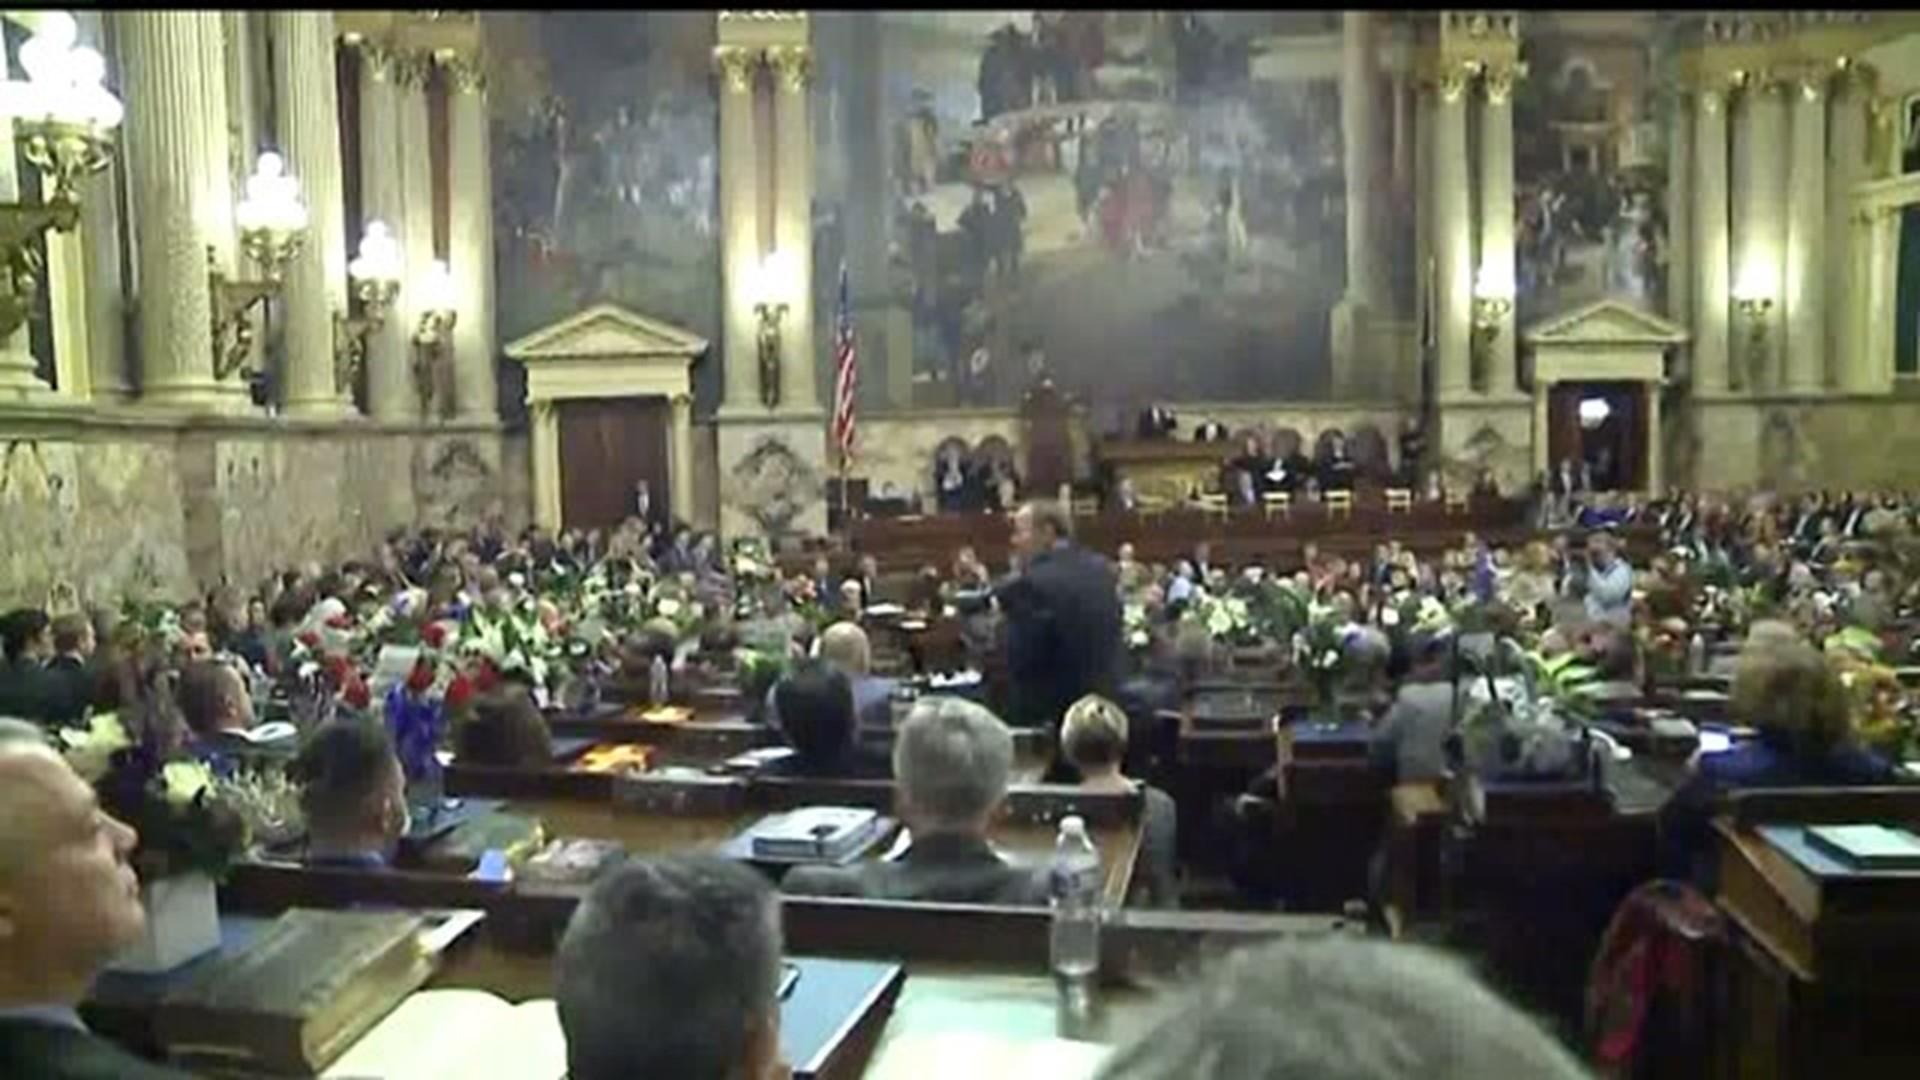 PA State lawmakers sworn in